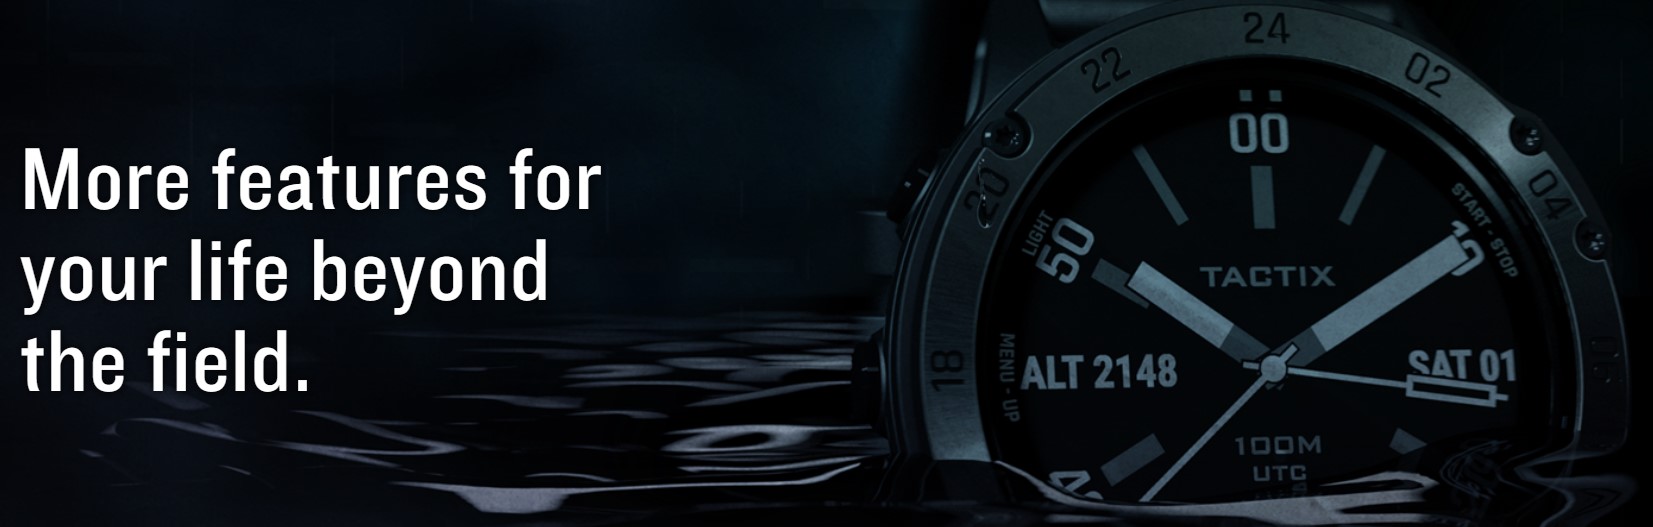 Garmin tactix® Delta - Sapphire Edition - Premium Tactical GPS Watch with Silicone Band -1